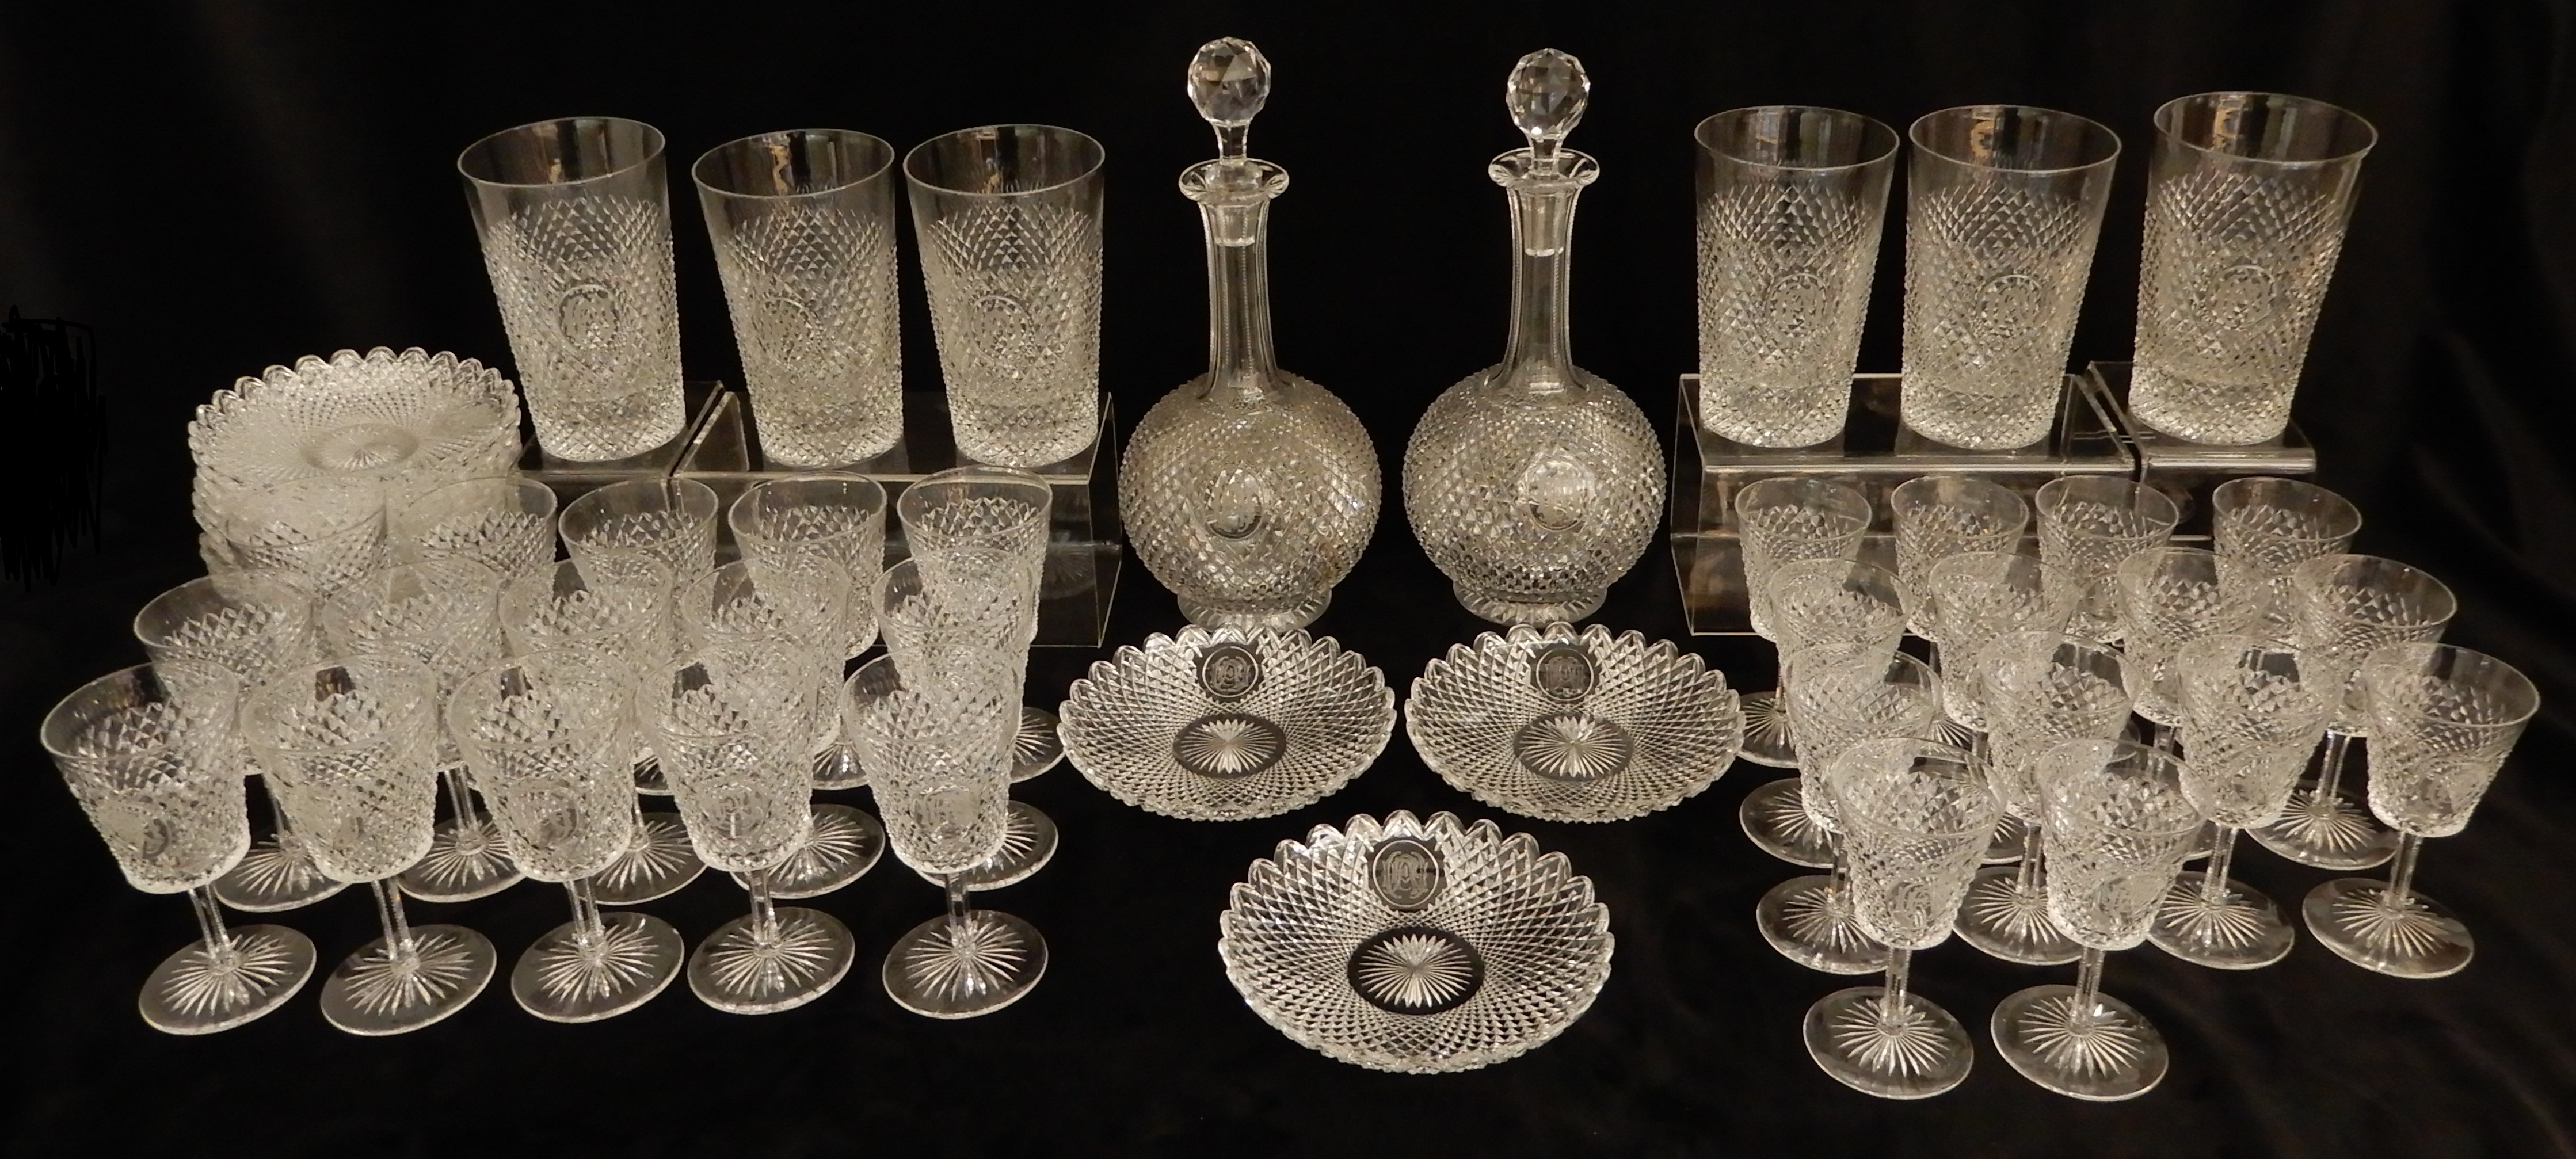 A SUITE OF LATE 19TH CENTURY DIAMOND CUT CRYSTAL comprising six large tumblers, 14.5cm high, fifteen